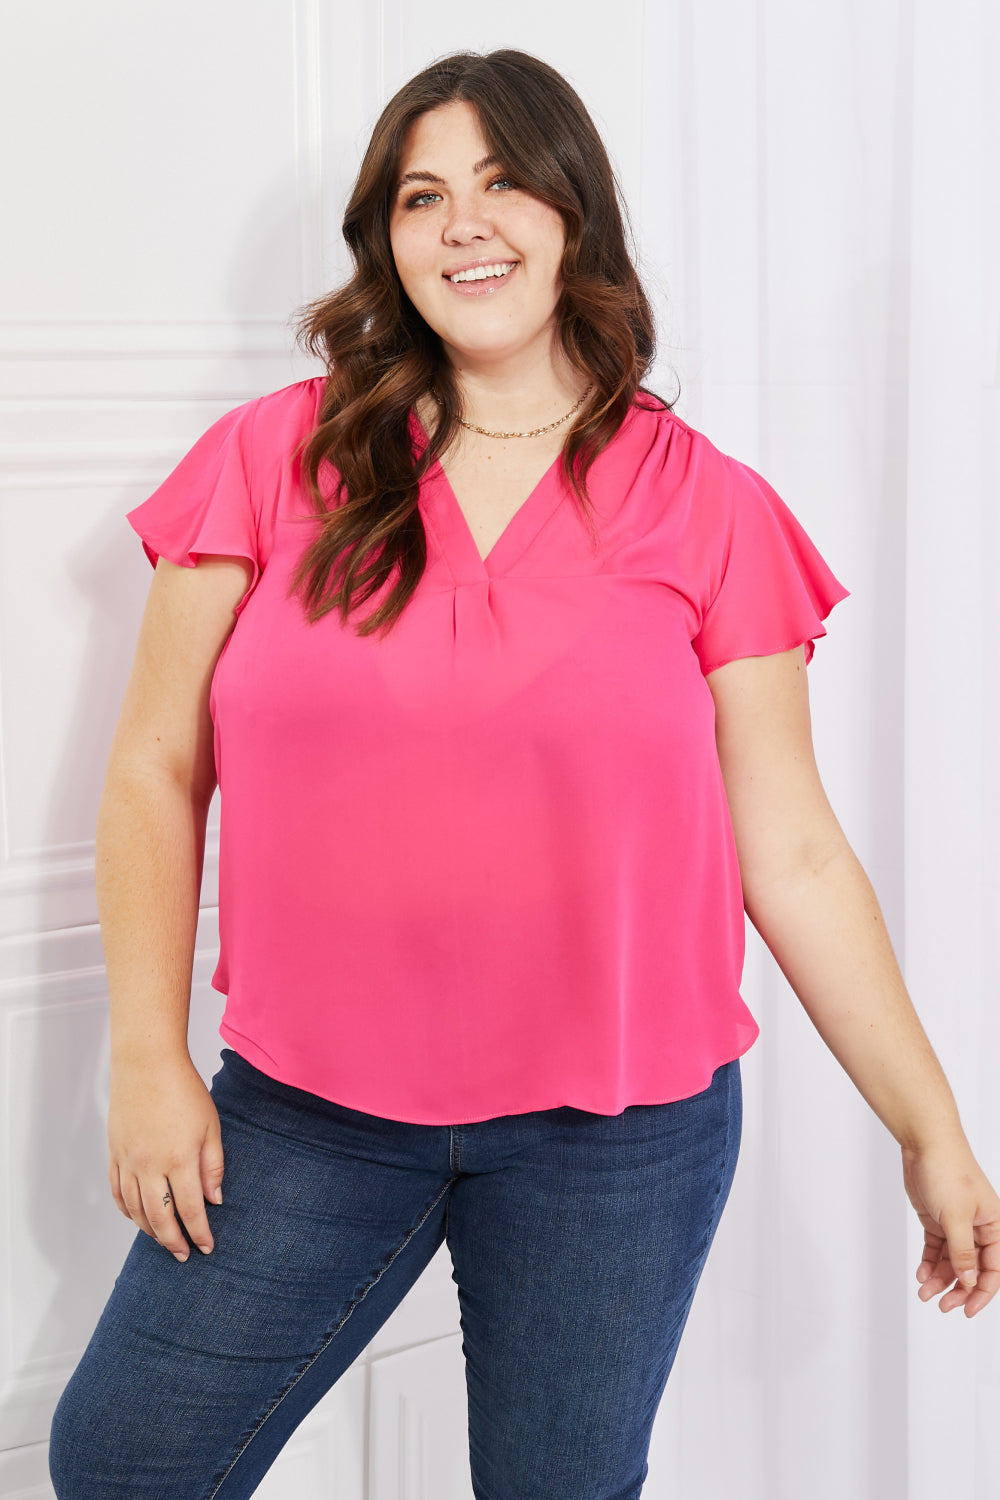 Sew In Love Just For You Short Ruffled Sleeve Length Top in Hot Pink